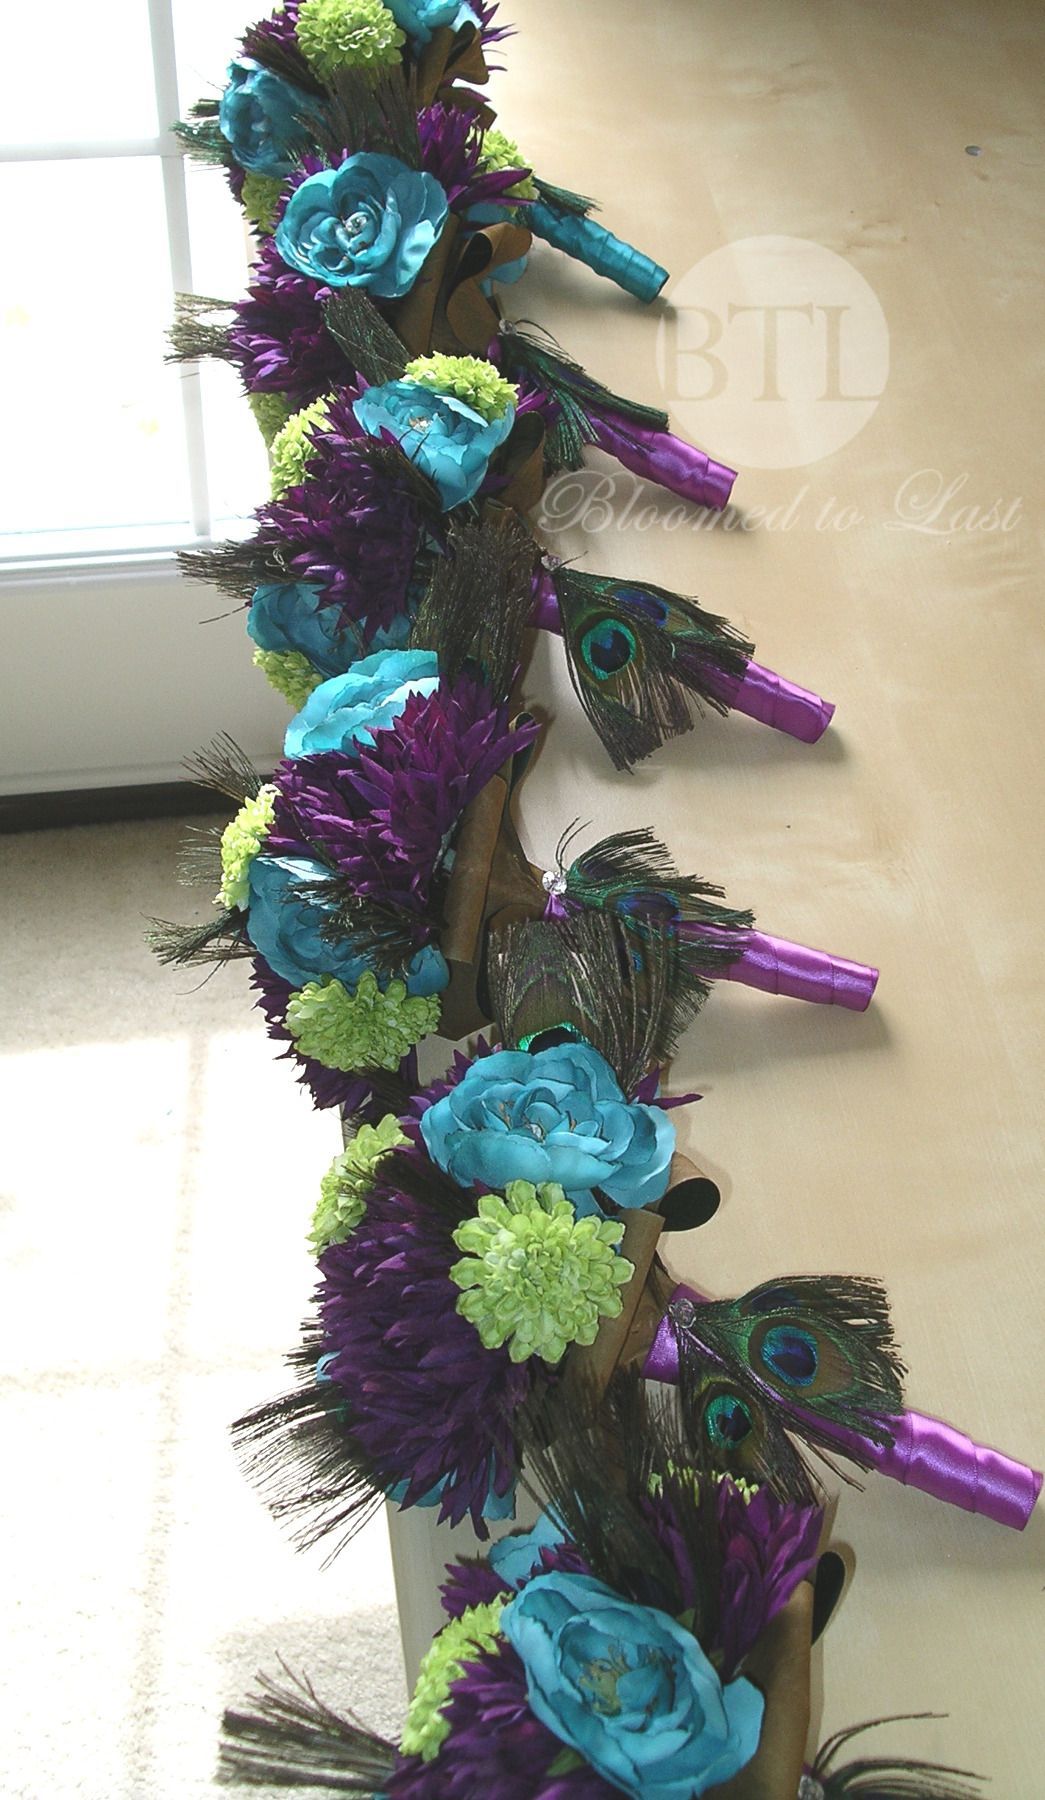 Peacock feather bouquets all lined up and ready to go. Stunning! WV, VA, MD, DC Wedding | Wedding Planning | Peacock Feather